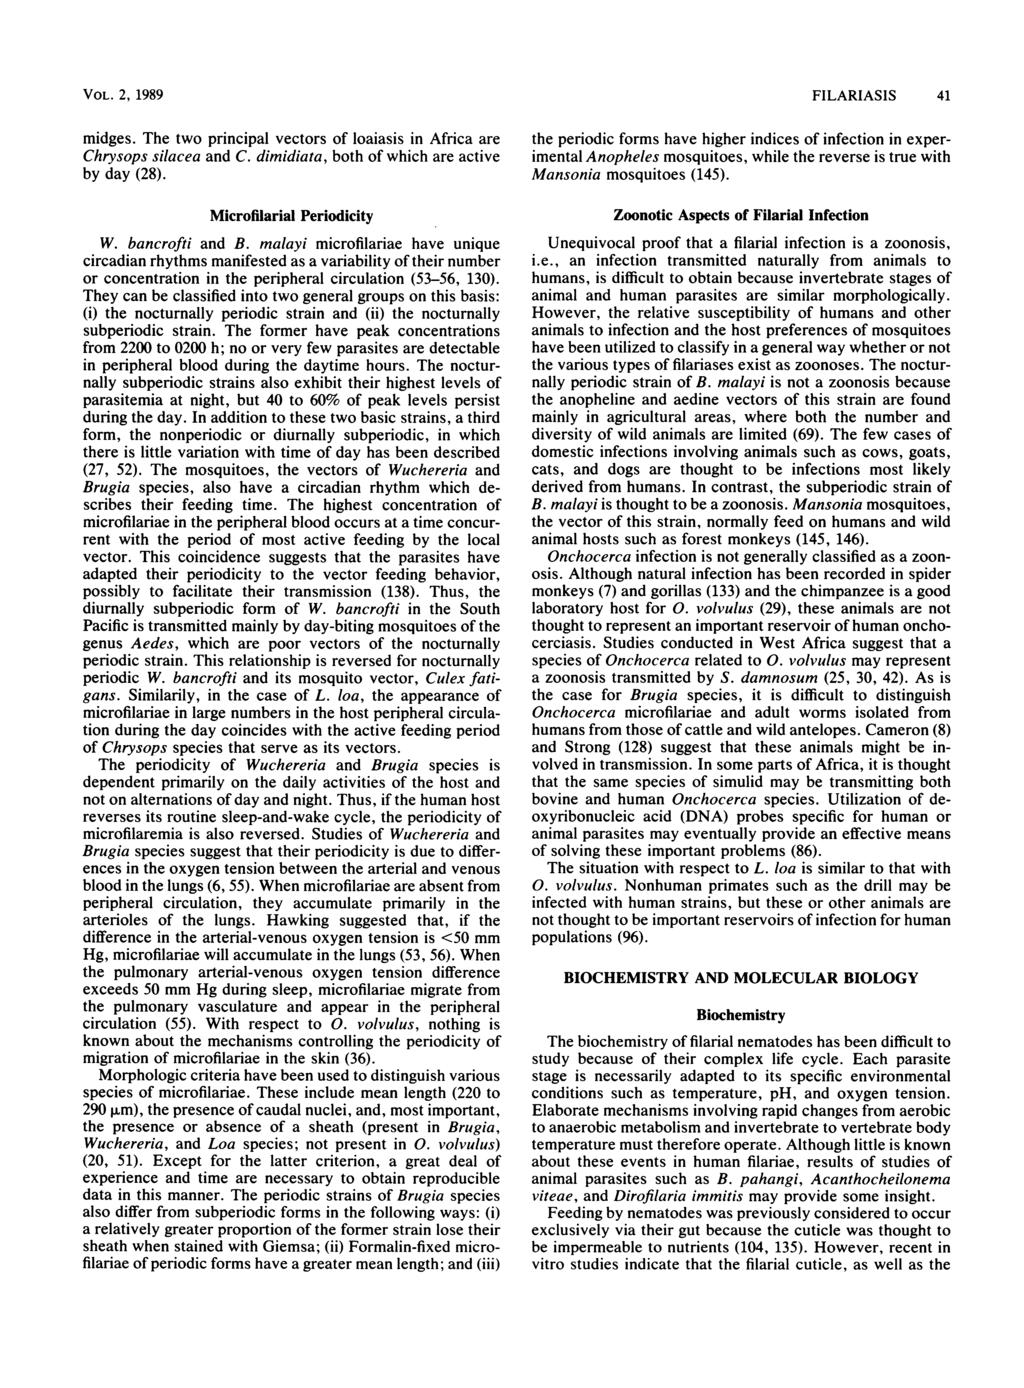 VOL. 2, 1989 midges. The two principal vectors of loaiasis in Africa are Chrysops silacea and C. dimidiata, both of which are active by day (28). Microfflarial Periodicity W. bancrofti and B.